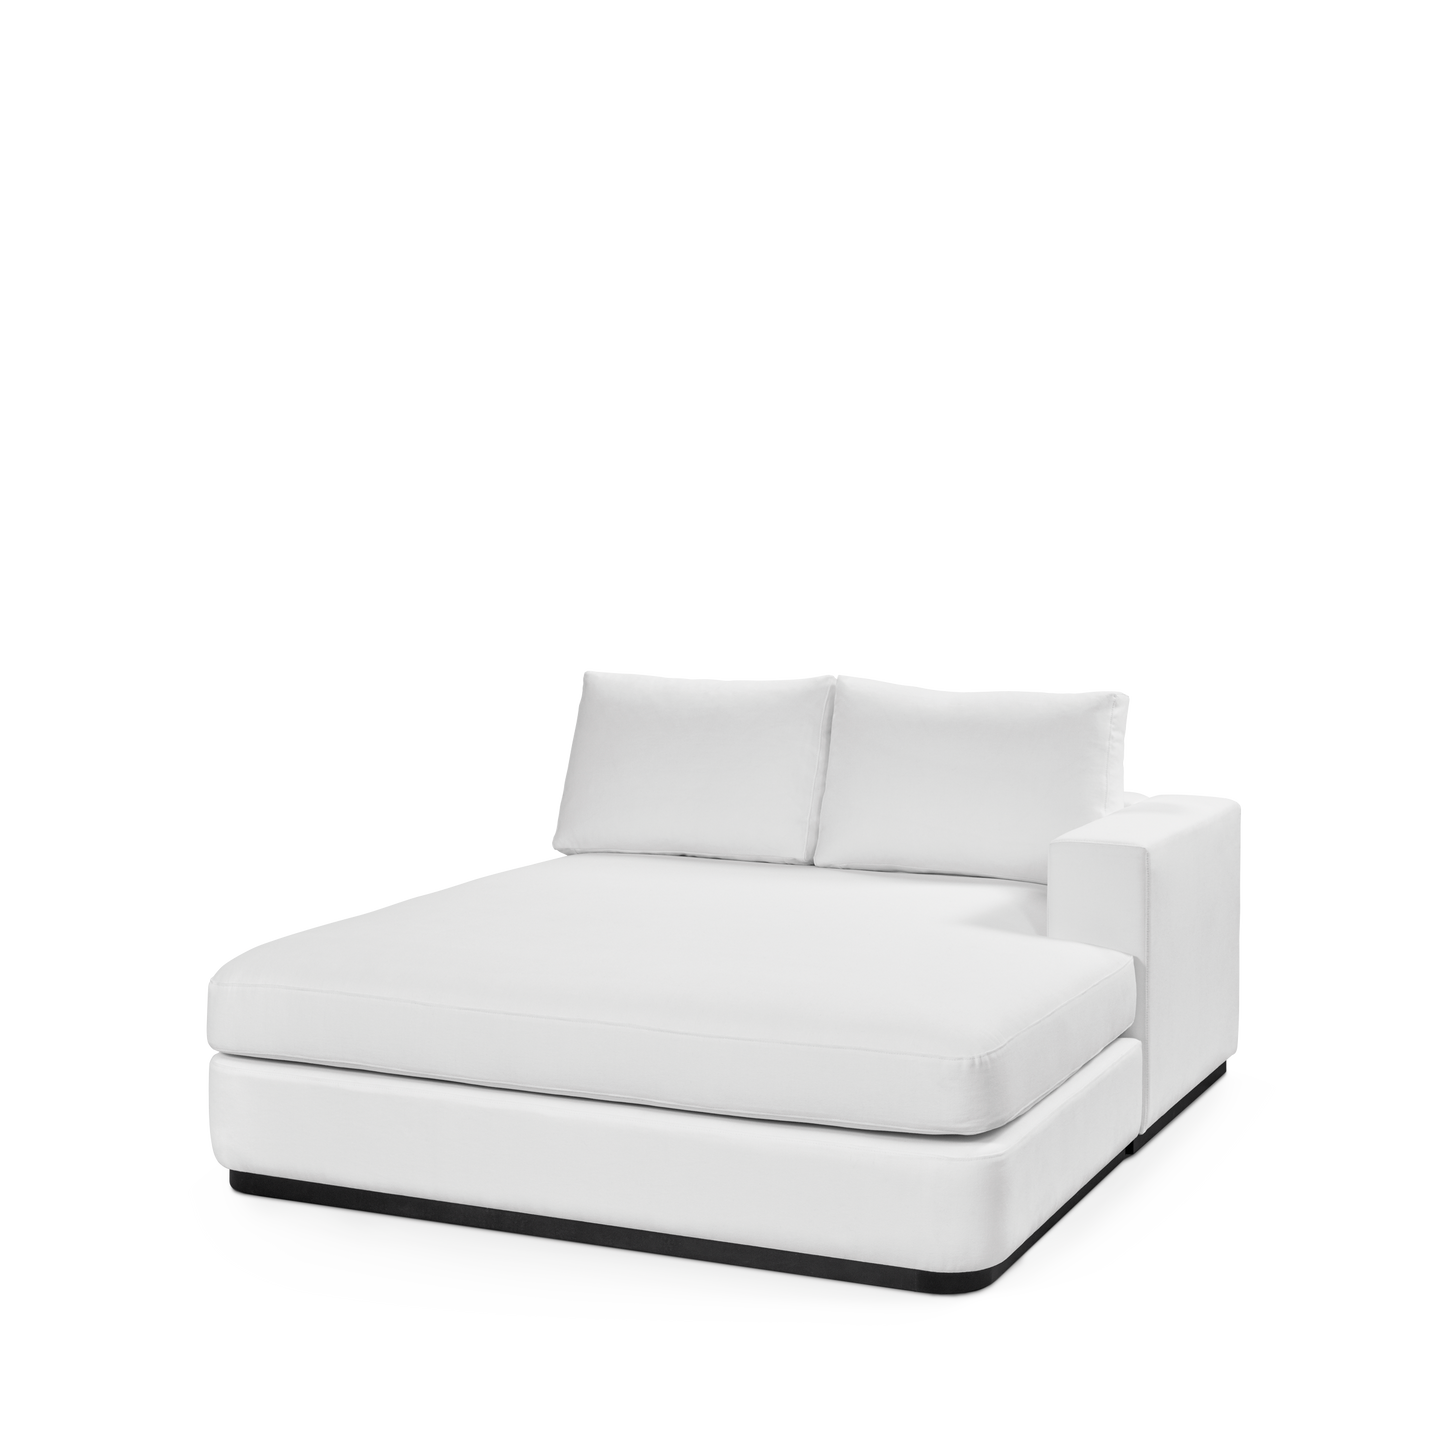 Front view ATLAS 160 Lounge Bed arm rest right with white textile